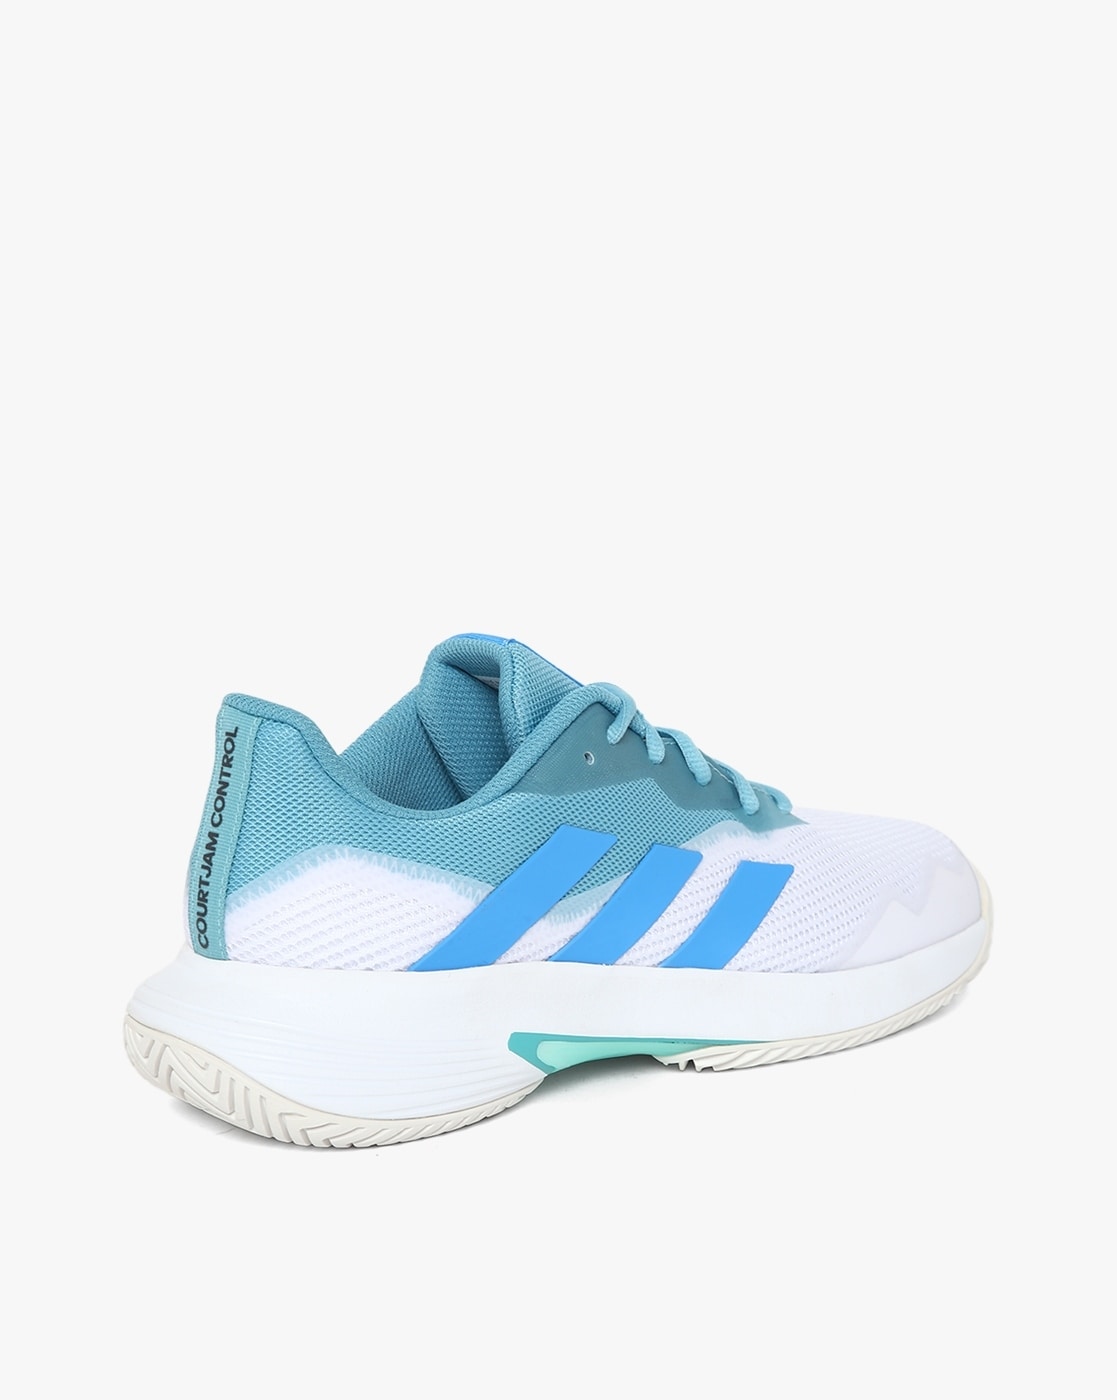 adidas Courtjam Control M Tennis Shoes in Blue Womens Mens Shoes Mens Trainers Low-top trainers Save 1% 